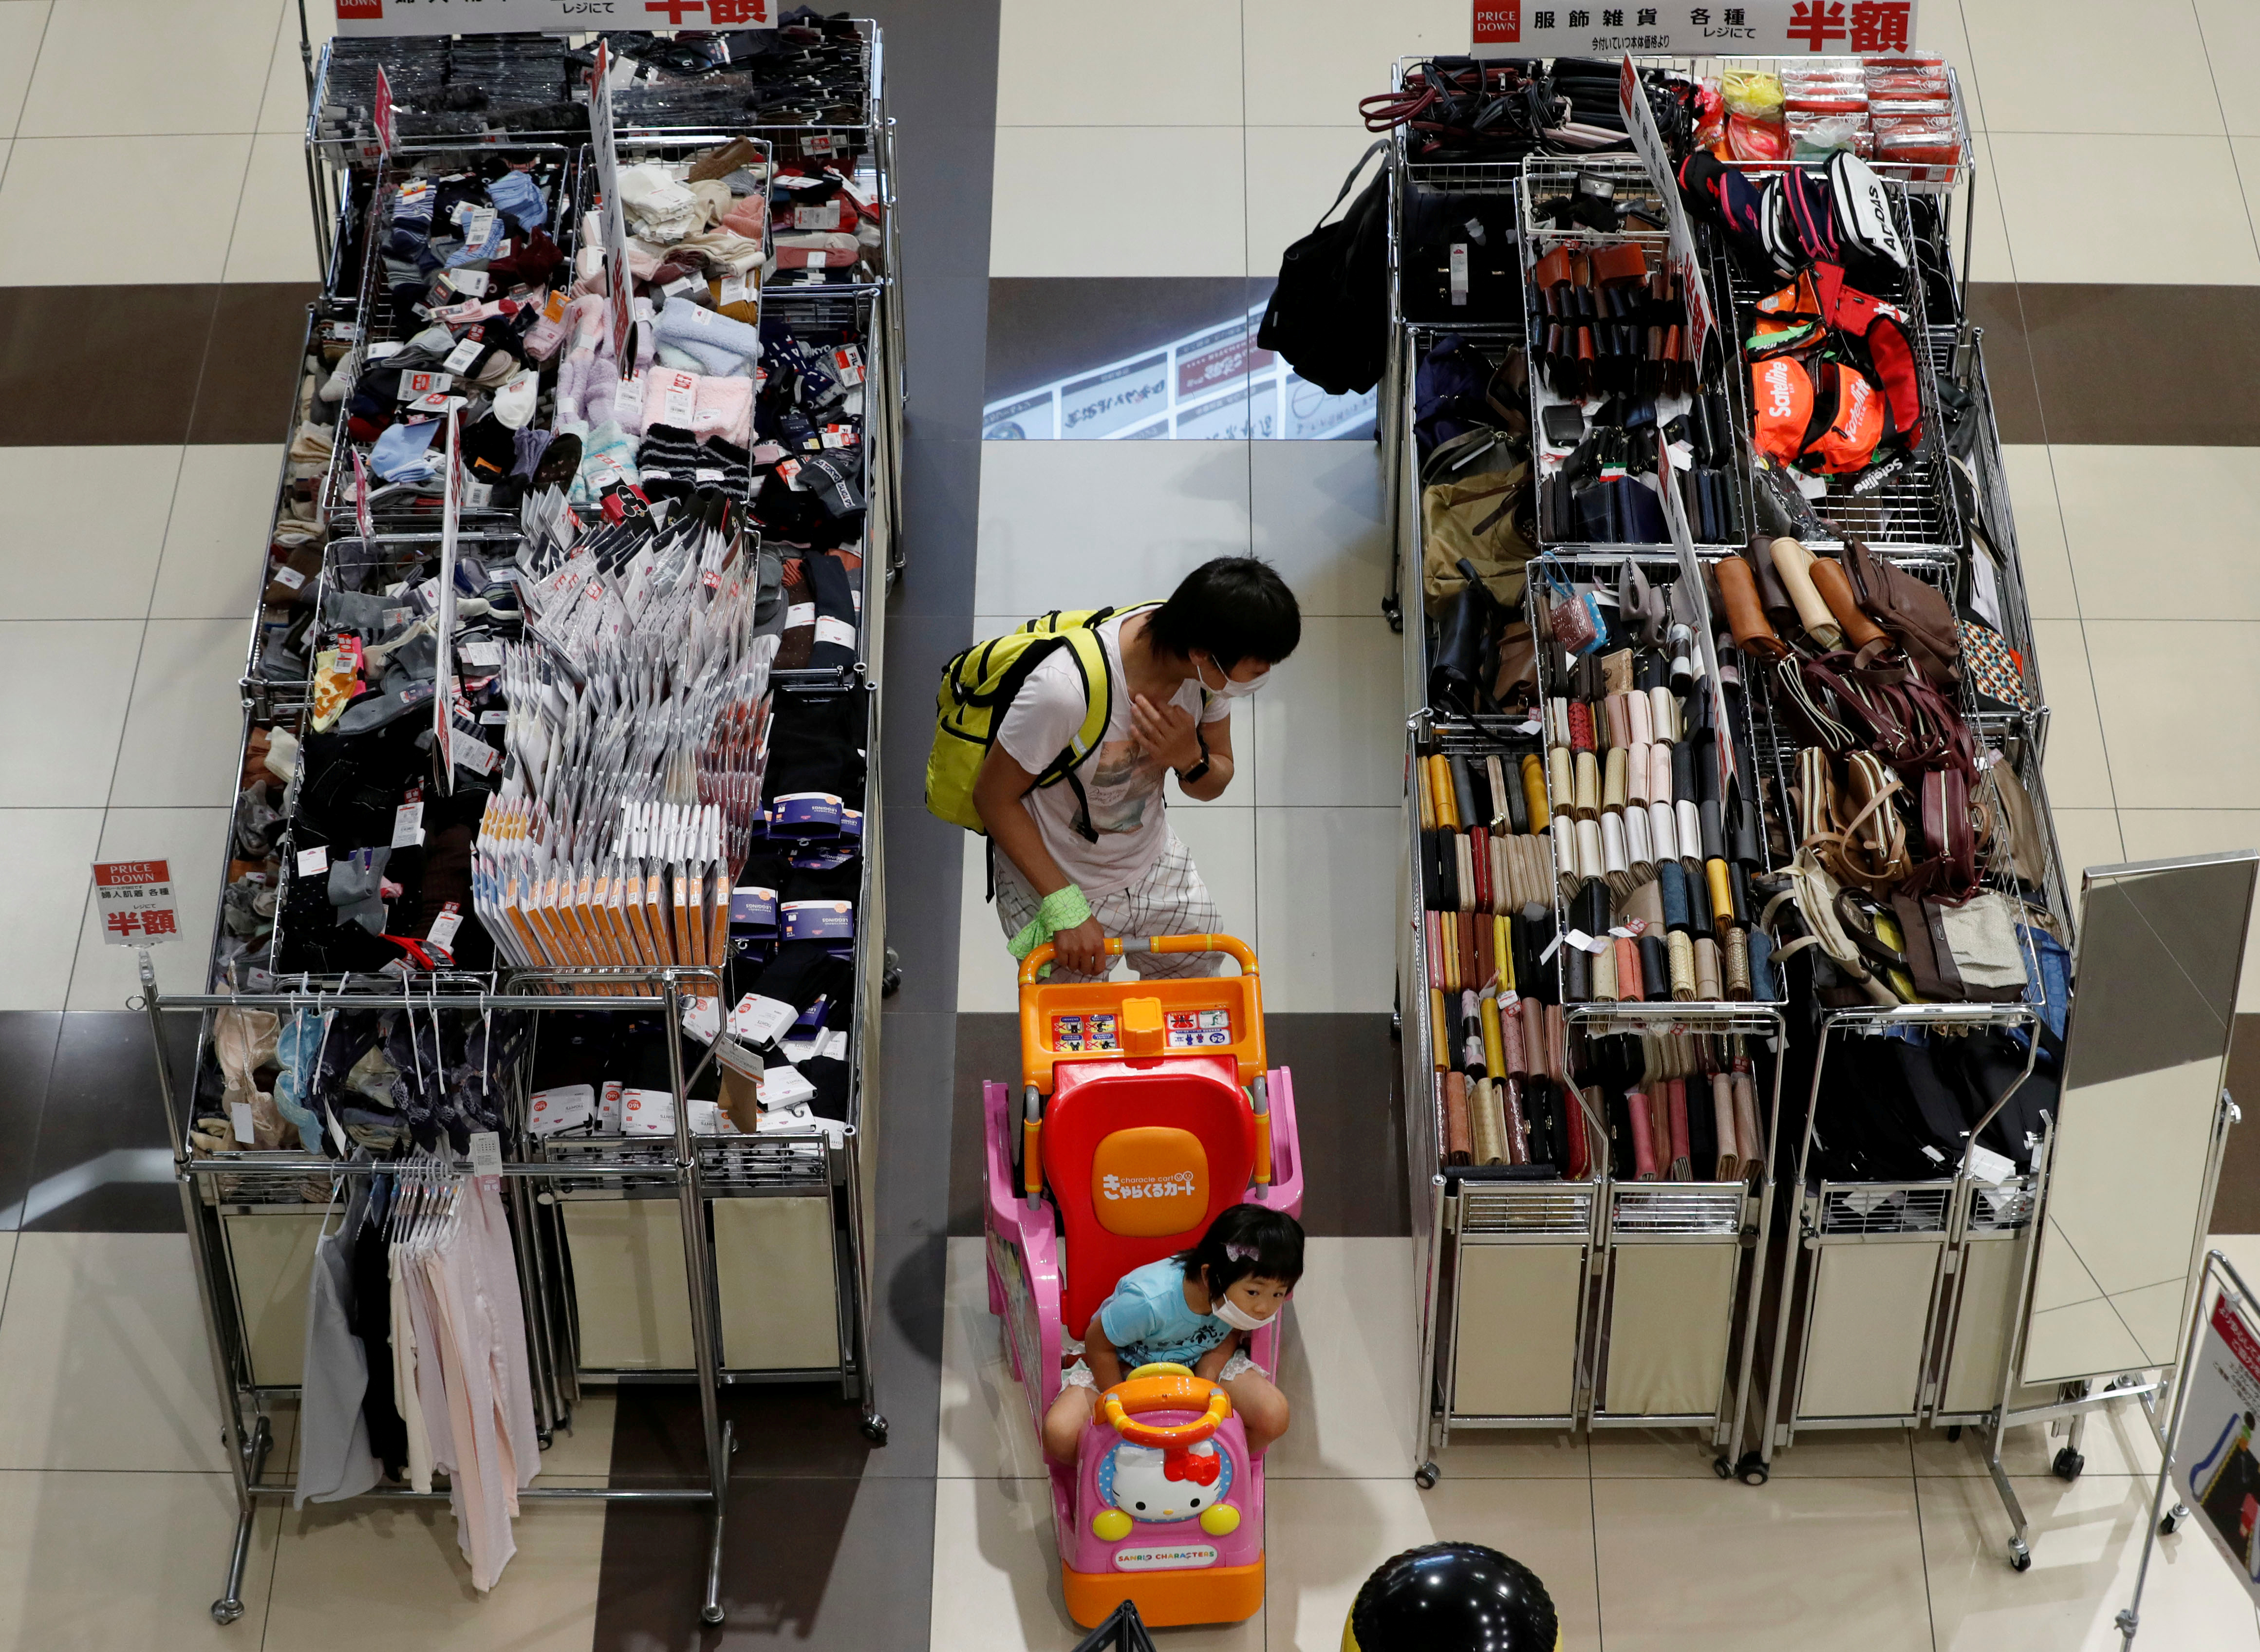 A shopper looks at goods at Japan's supermarket group Aeon's shopping mall as the mall reopens amid the coronavirus disease (COVID-19) outbreak in Chiba